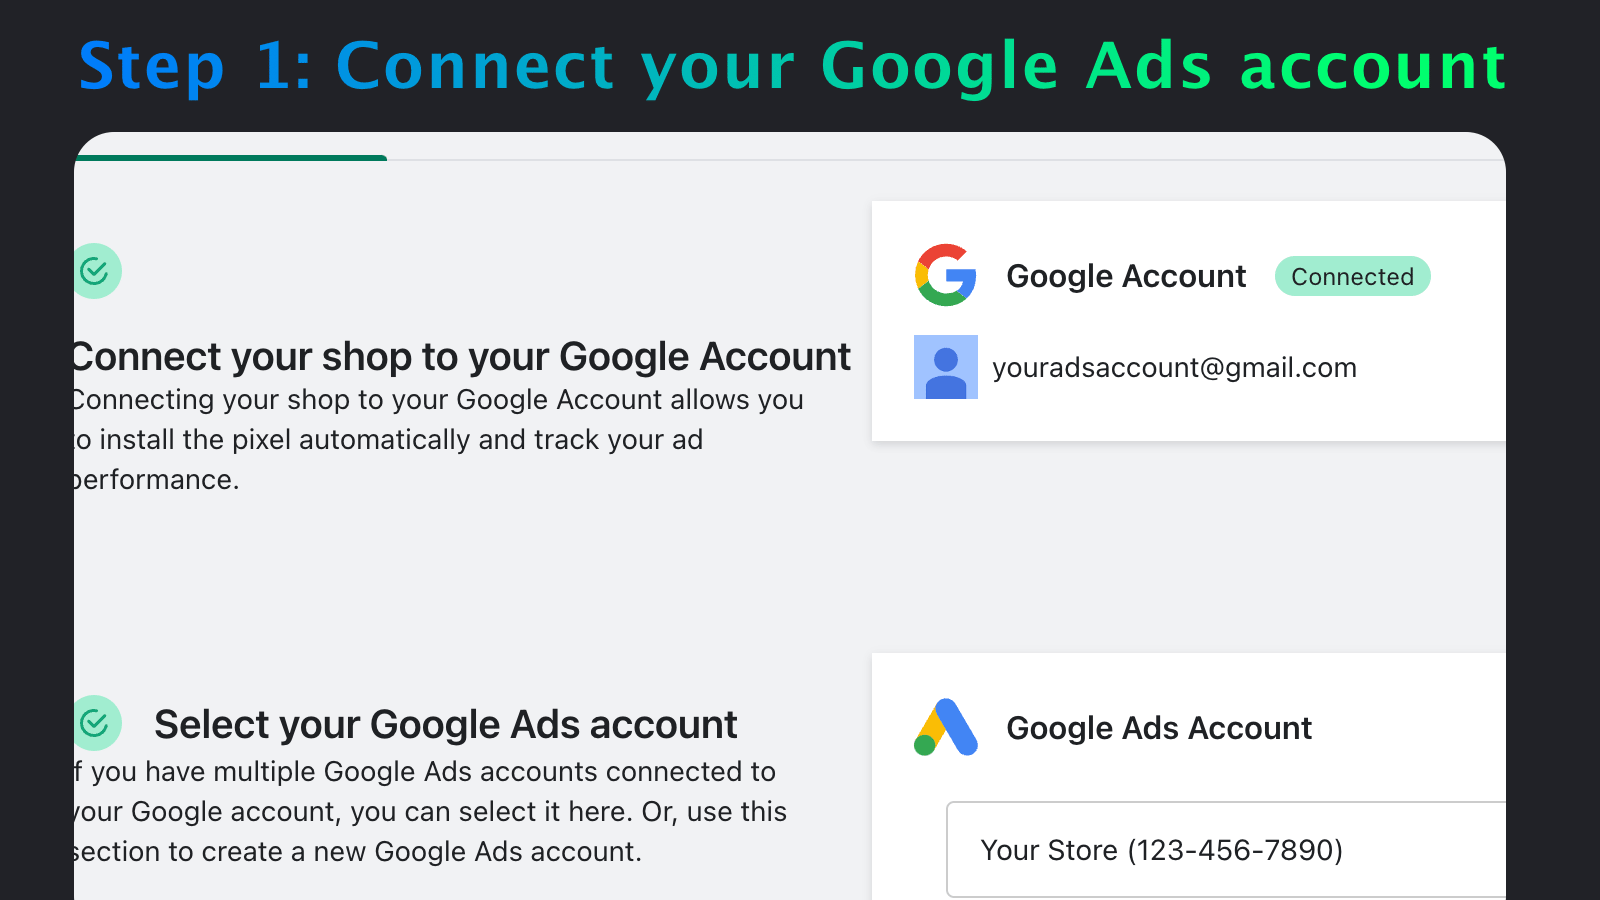 Step 1: Connect your Google Ads Account